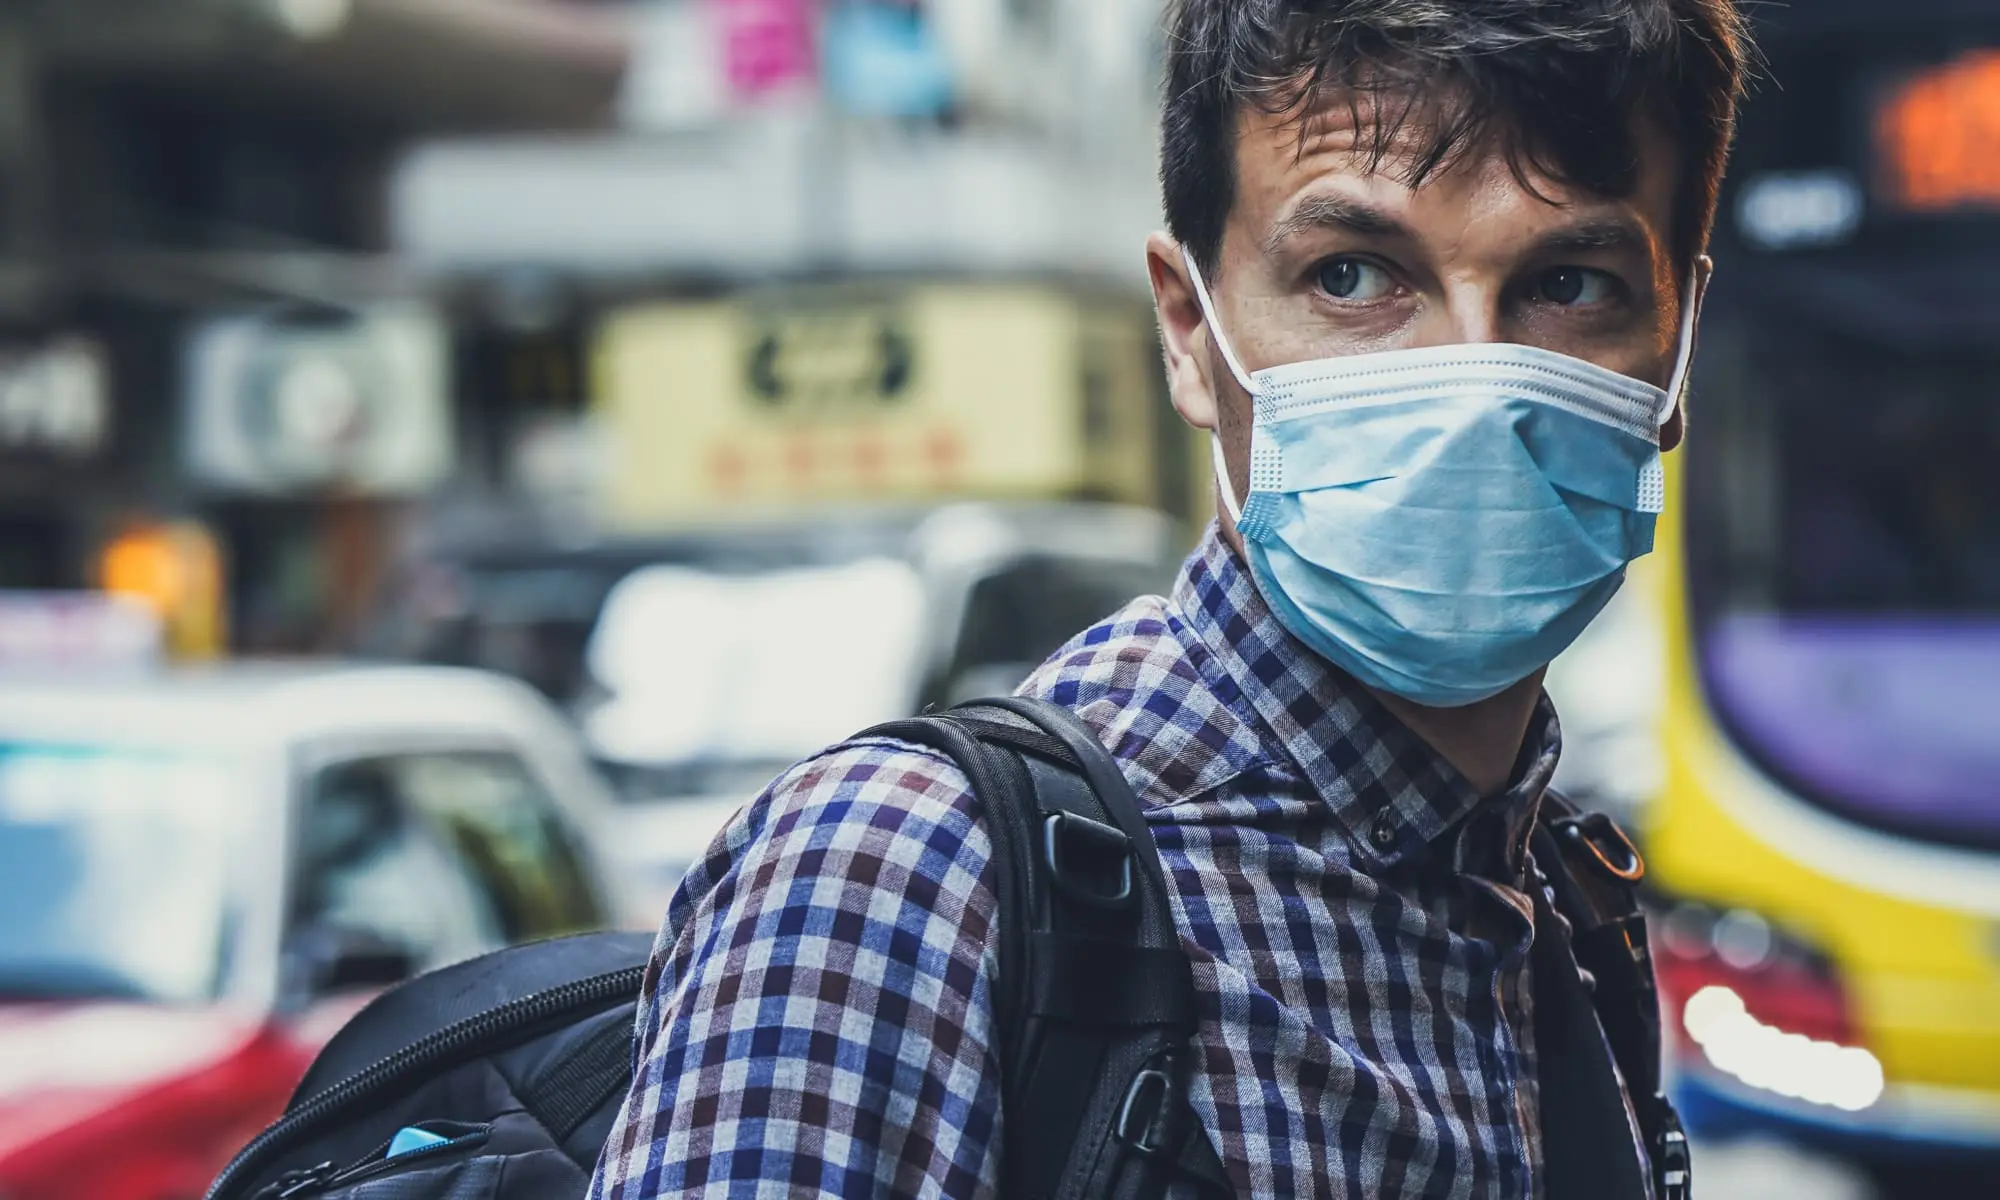 Man on a busy street wearing a face mask